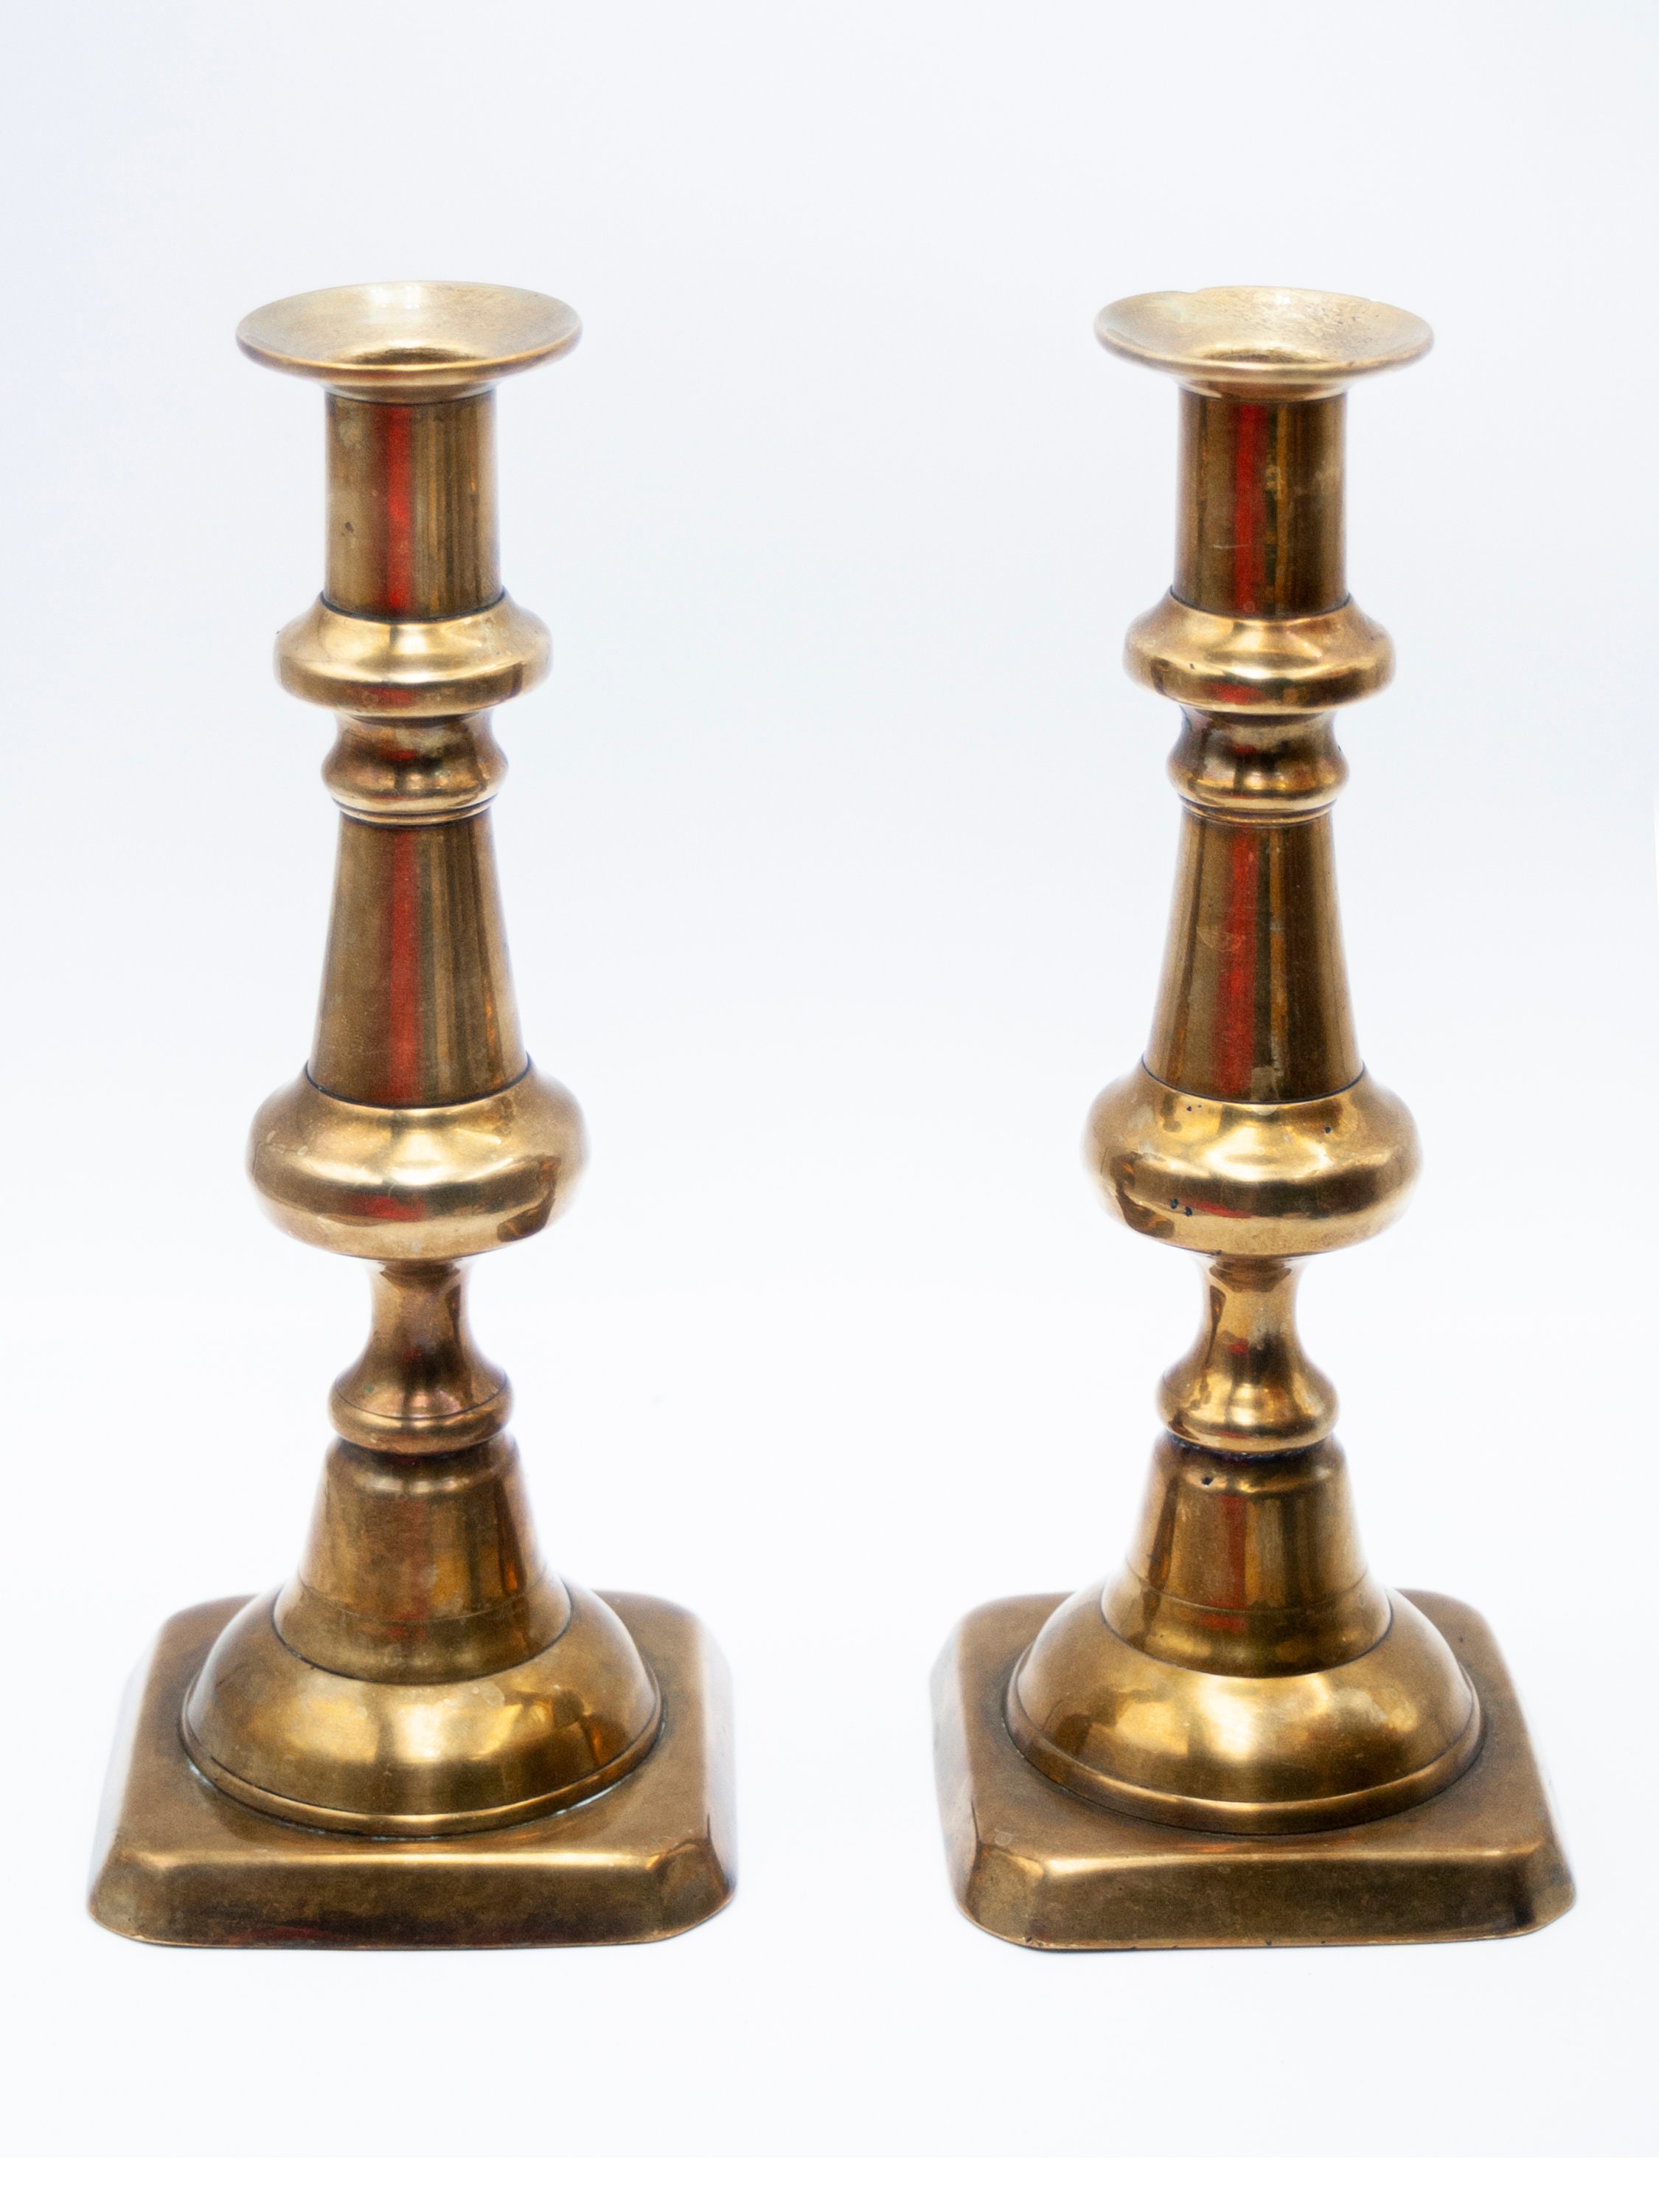 Set of Two Antique Victorian Brass Candlesticks, Tall Gold Candle Holders,  Vintage Tapered Candles Candelabra, C.1860-90 -  Sweden